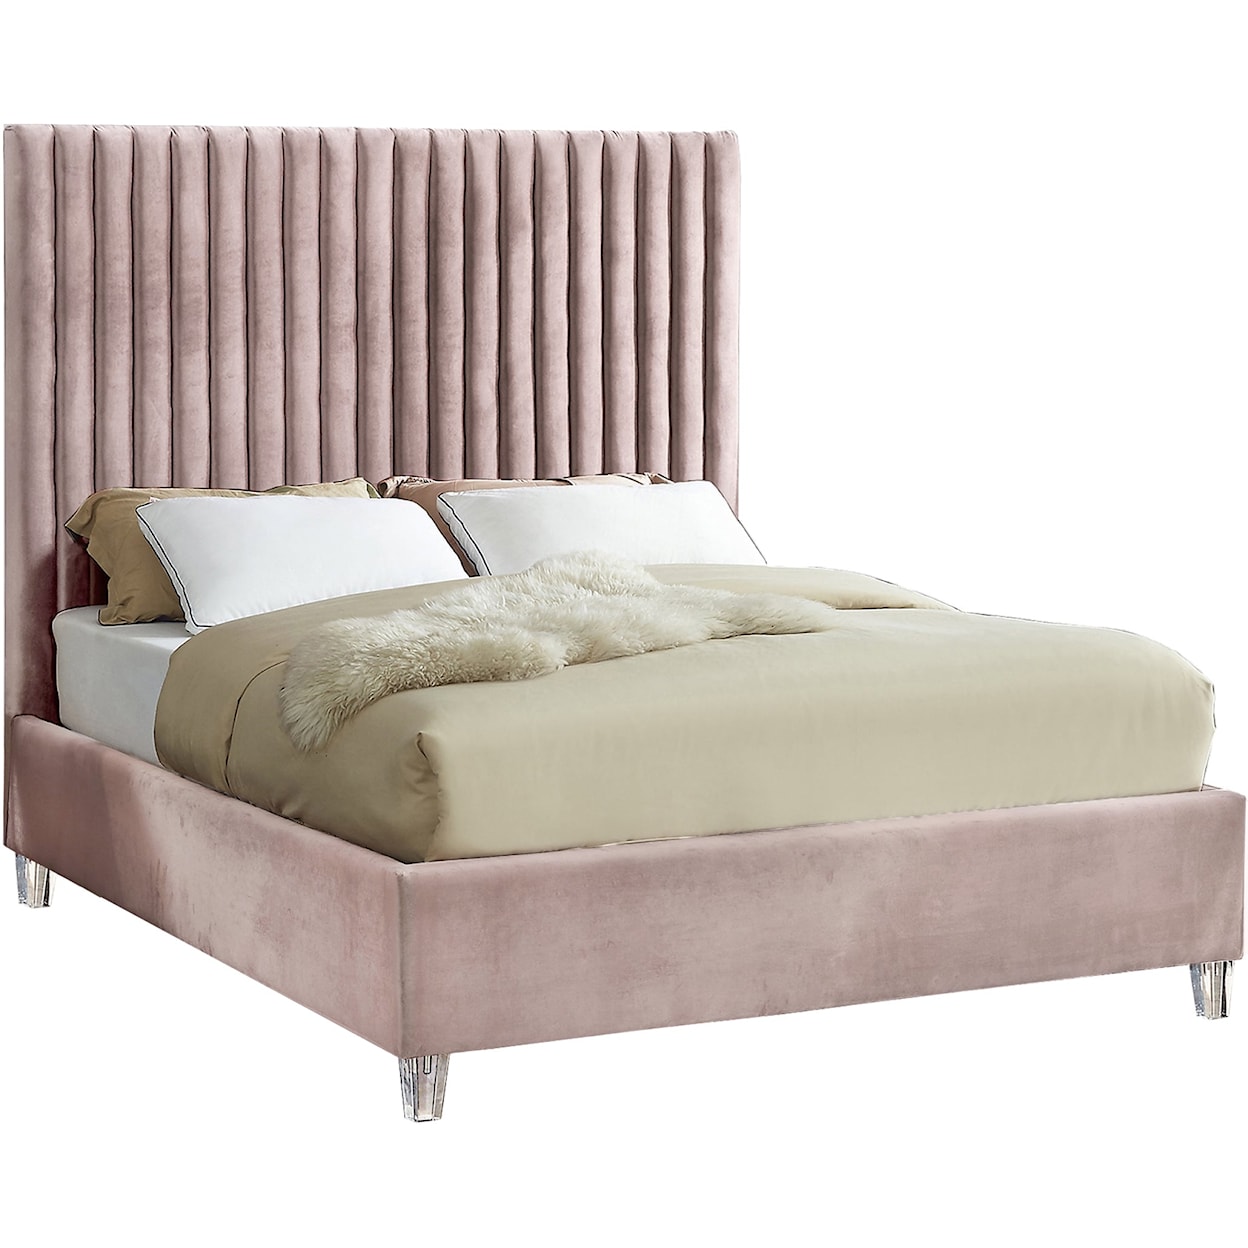 Meridian Furniture Candace King Bed